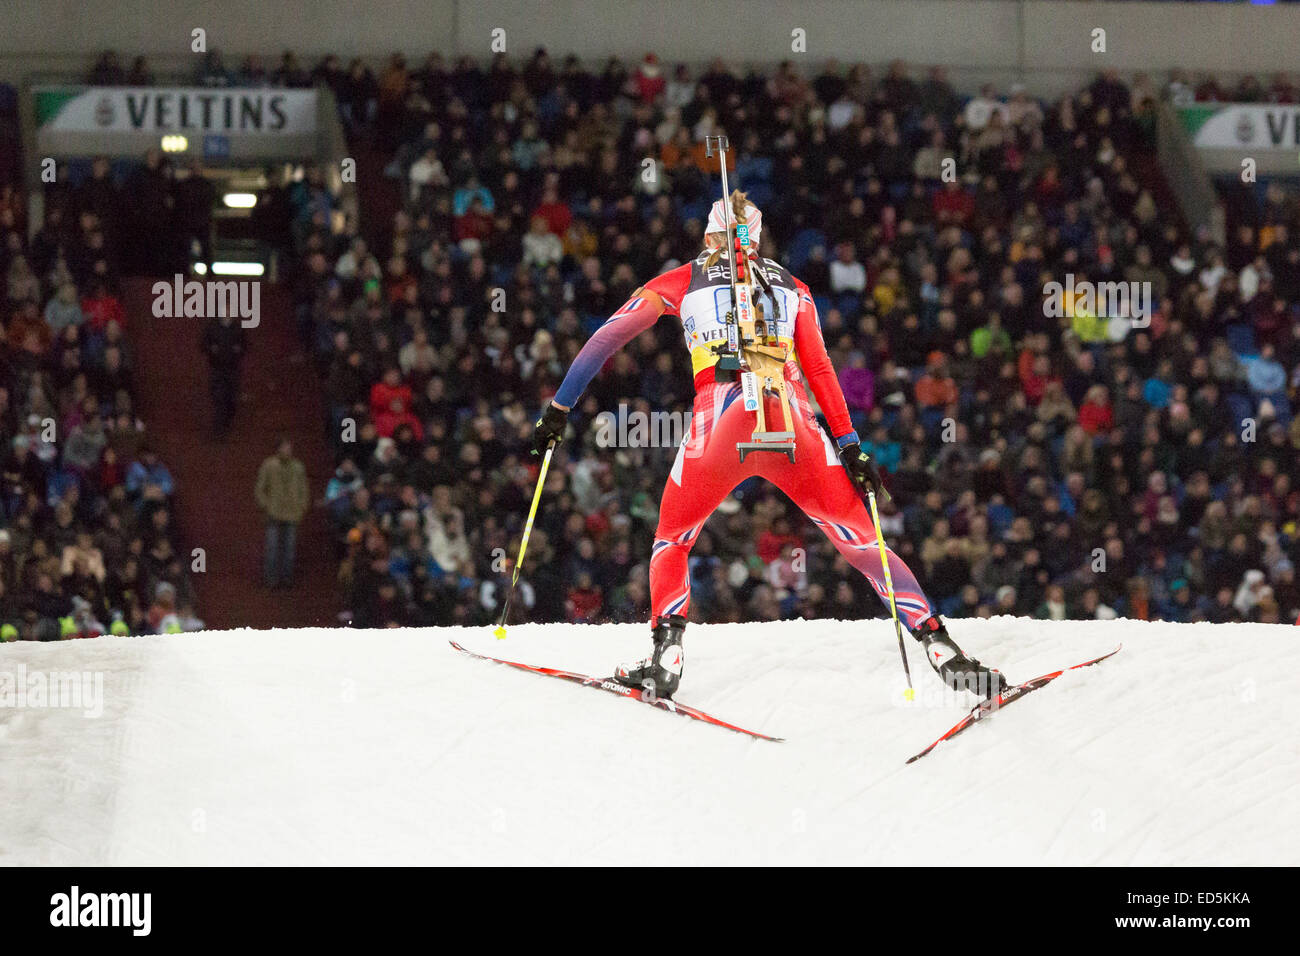 Horn of Norway competes in the Biathlon World Team Challenge at The Veltins Arena. Stock Photo